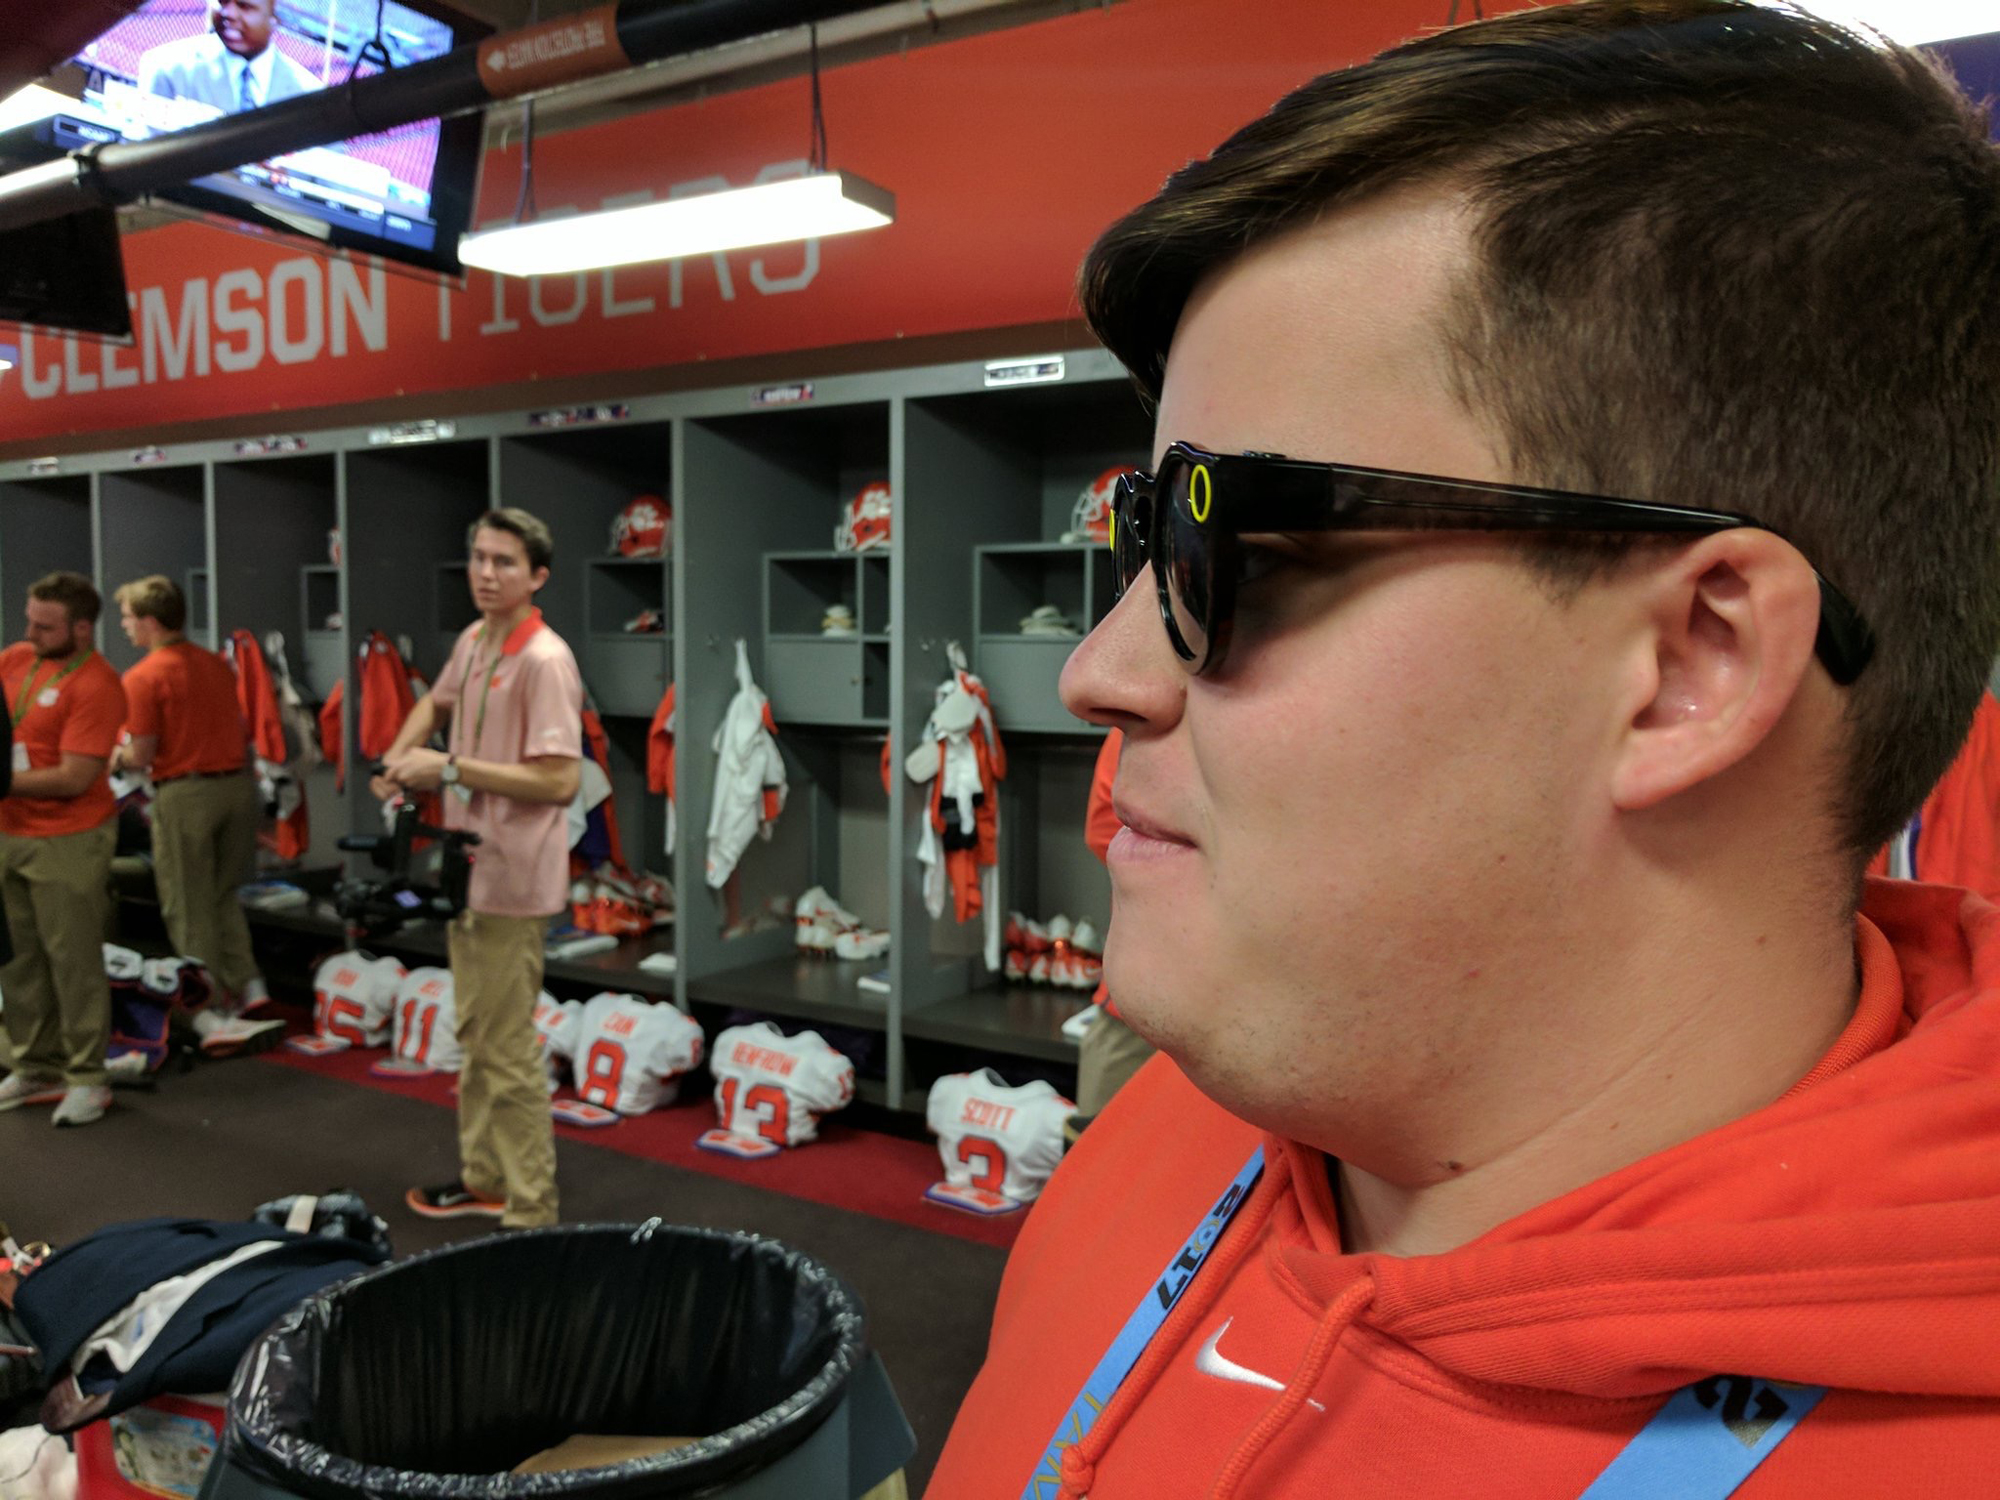 Snapchat Spectacles were among the many tools that Clemson used to turn behind-the-scenes content around quickly to fans.